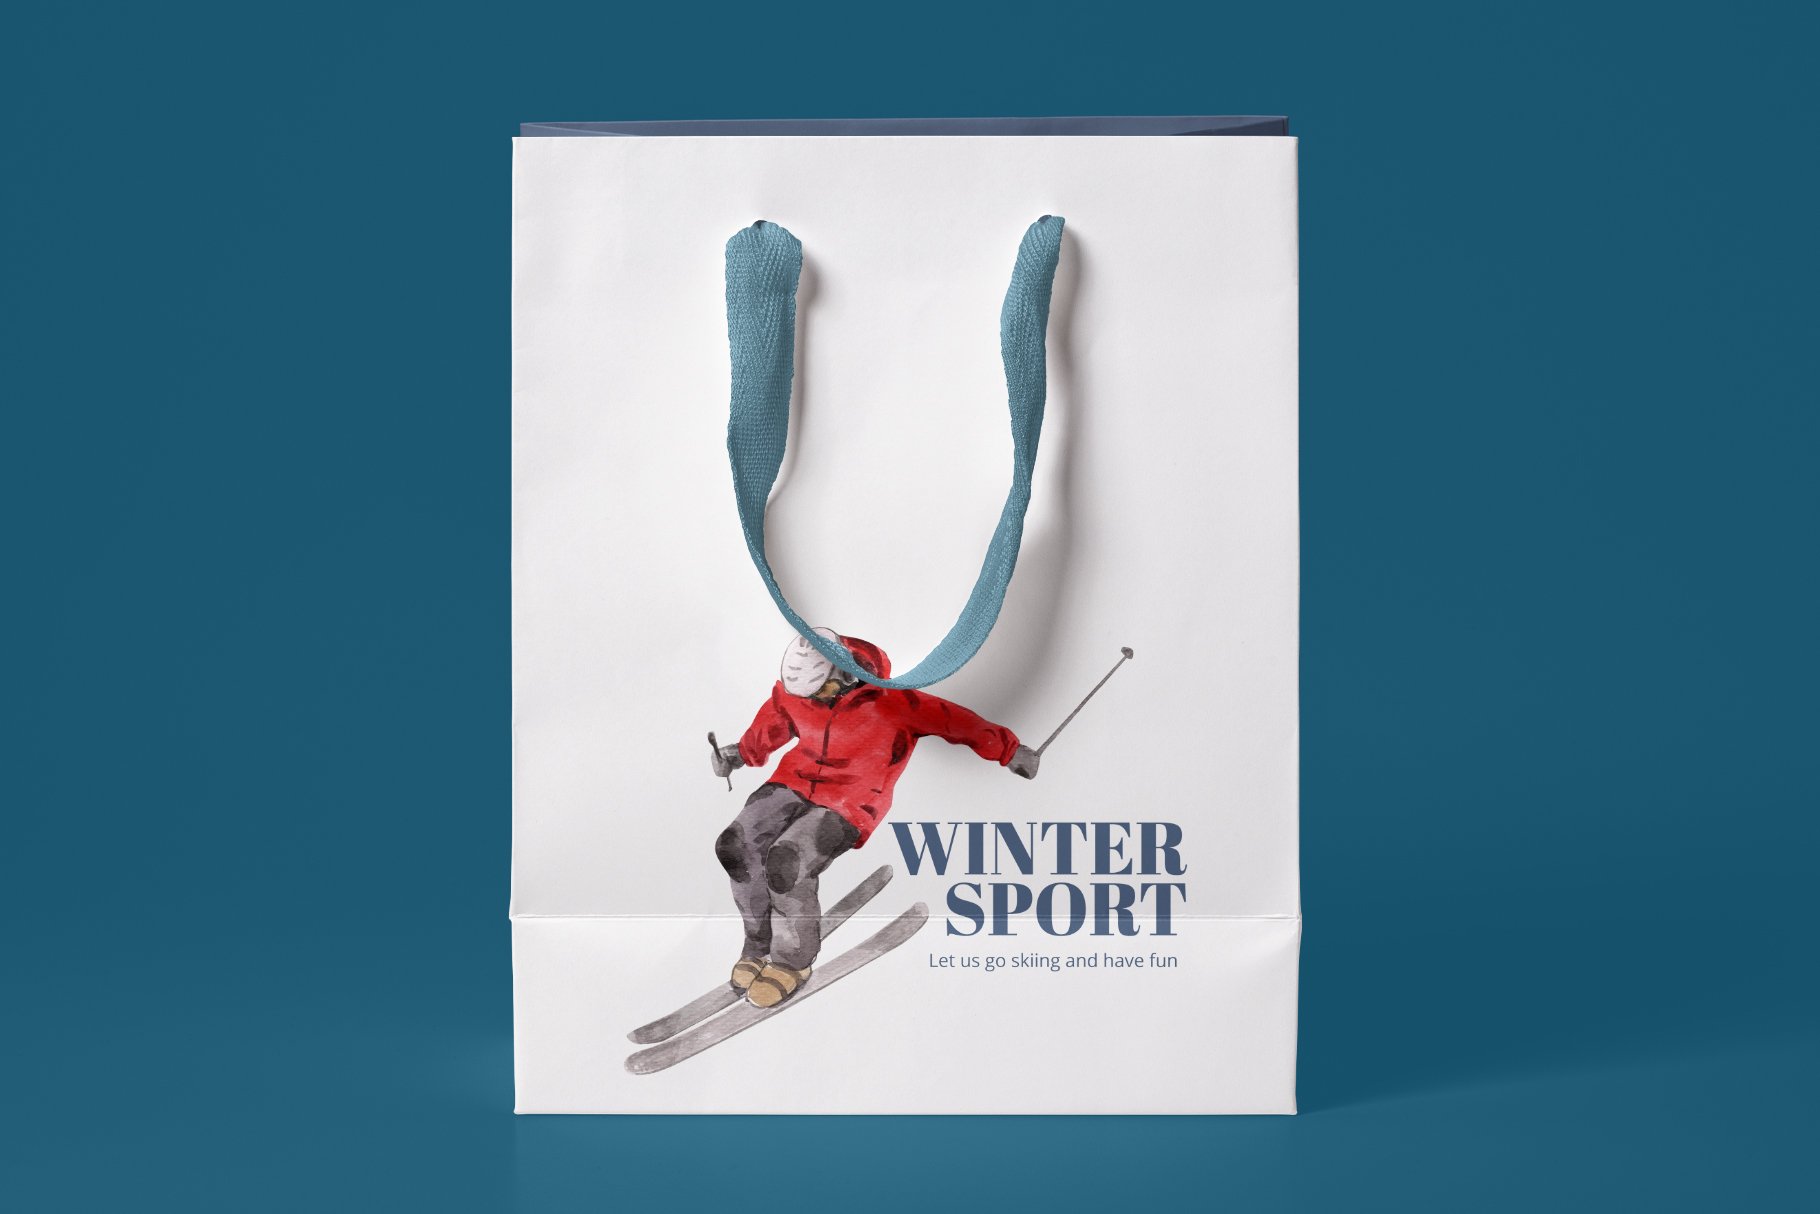 White paper package in winter sport style.